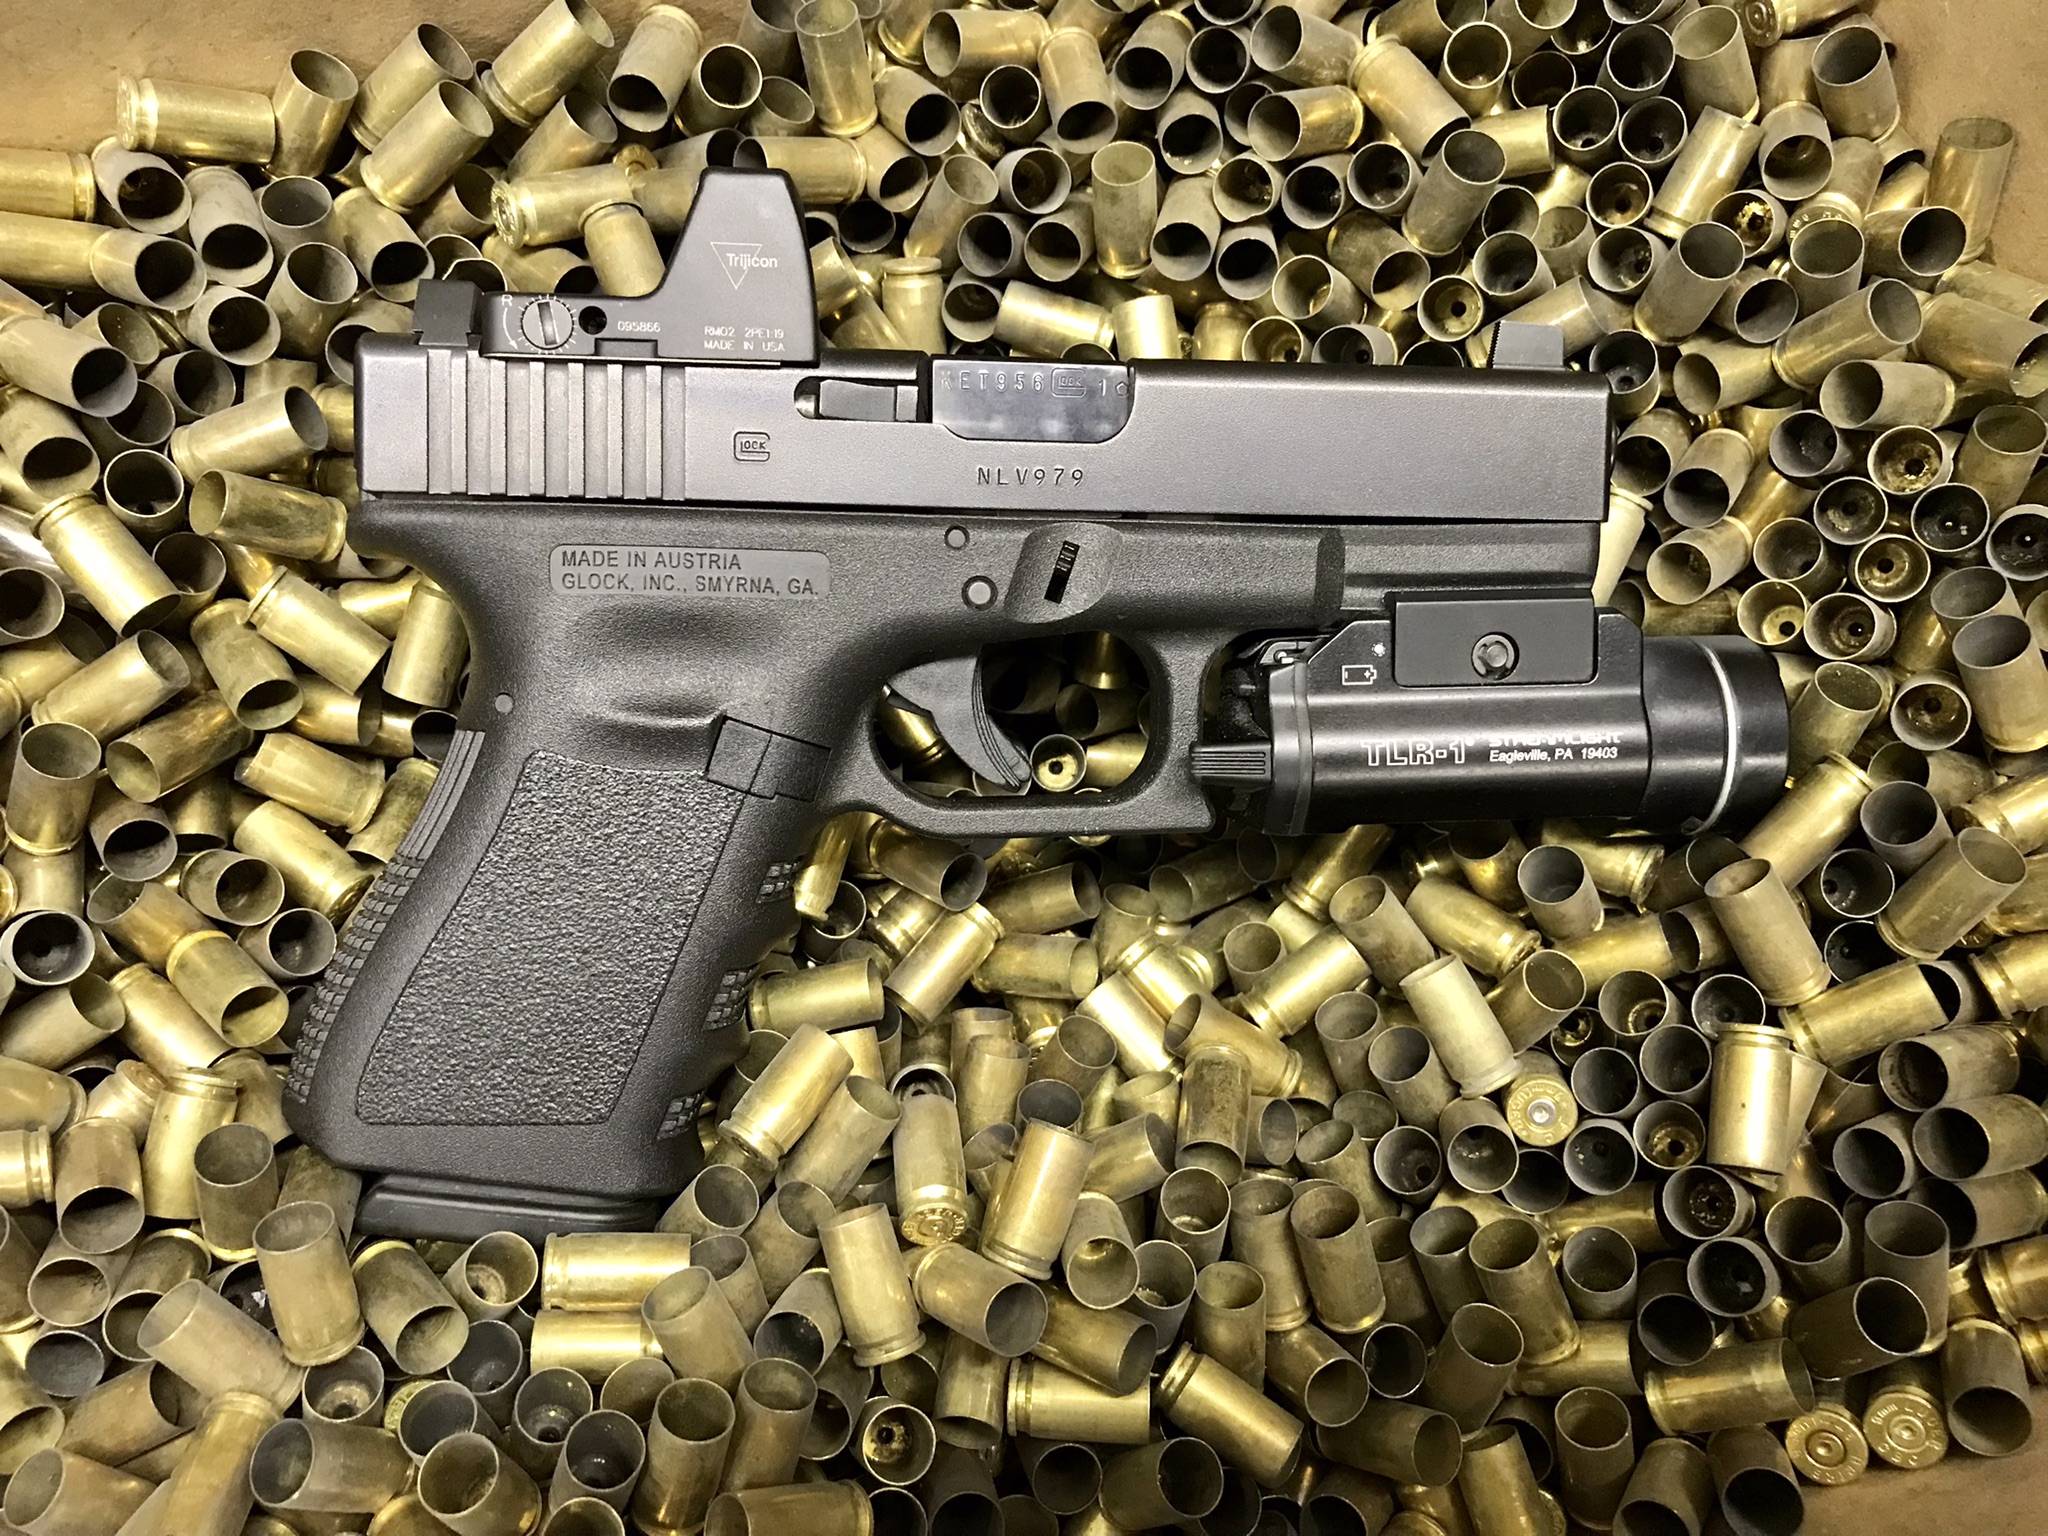 Glock 19 with Trijicon RMR red dot sight.